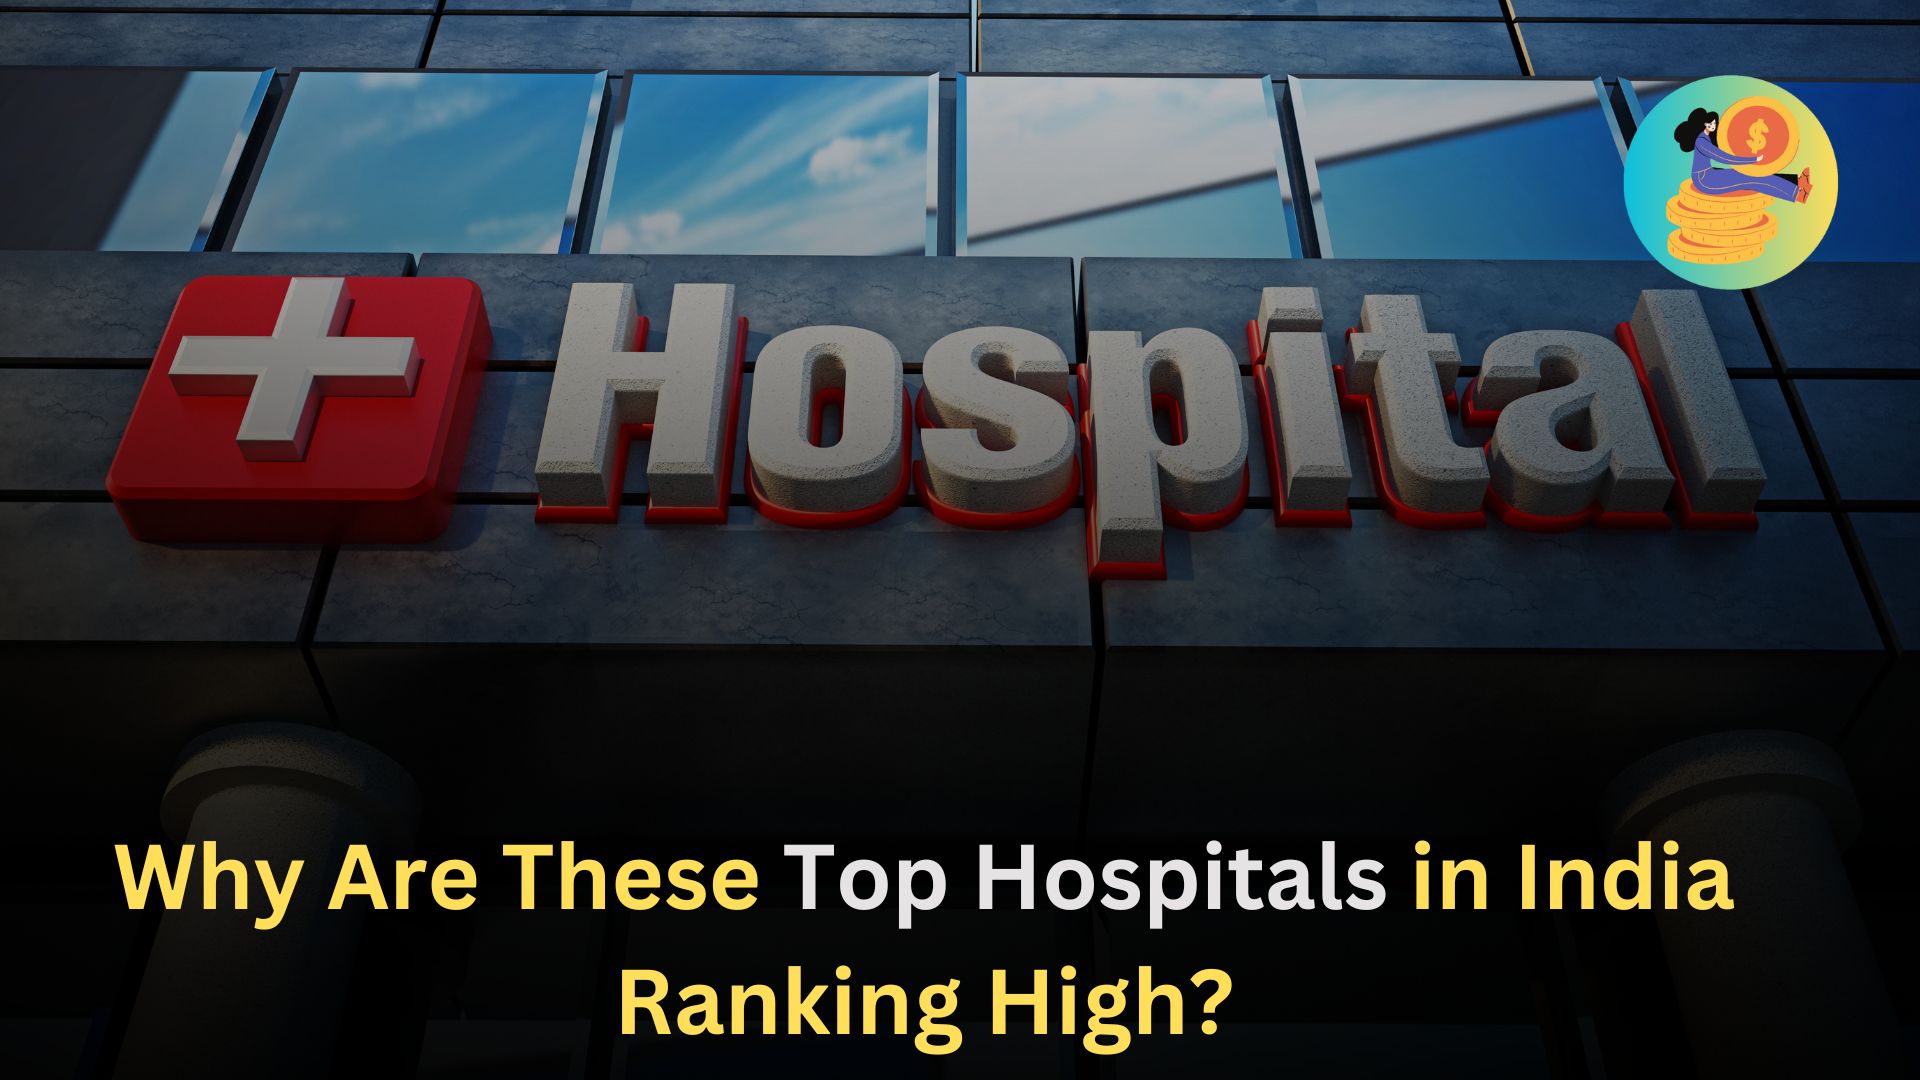 Why Are These Top Hospitals in India Ranking High